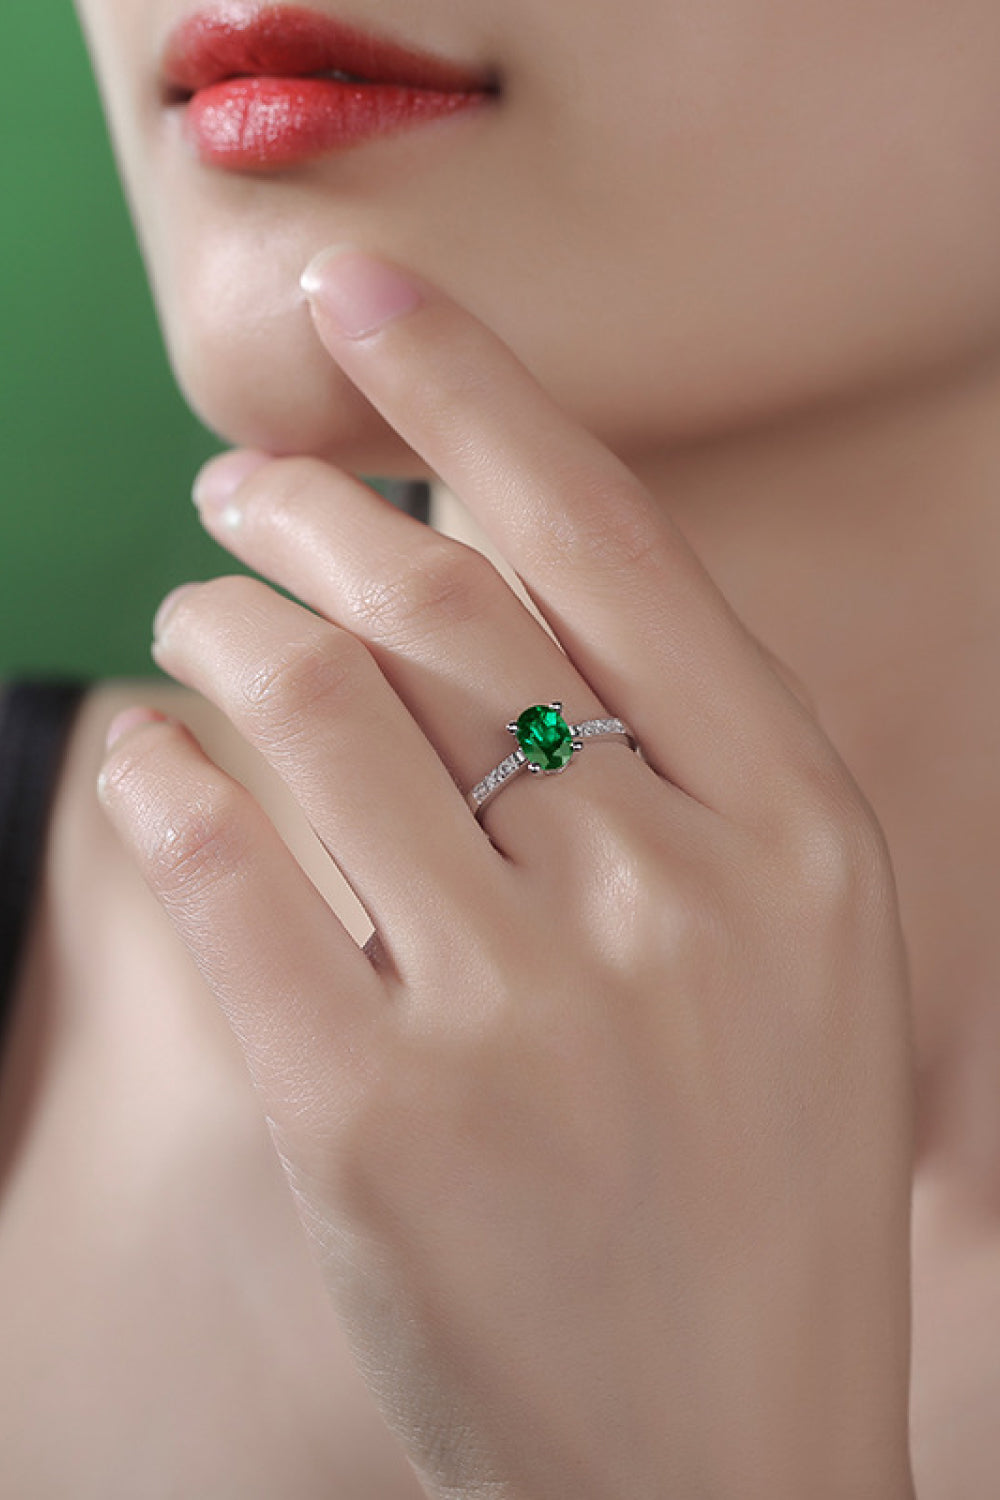 1 Carat Lab-Grown Emerald Side Stone Ring - Tophatter Shopping Deals - Electronics, Jewelry, Beauty, Health, Gadgets, Fashion